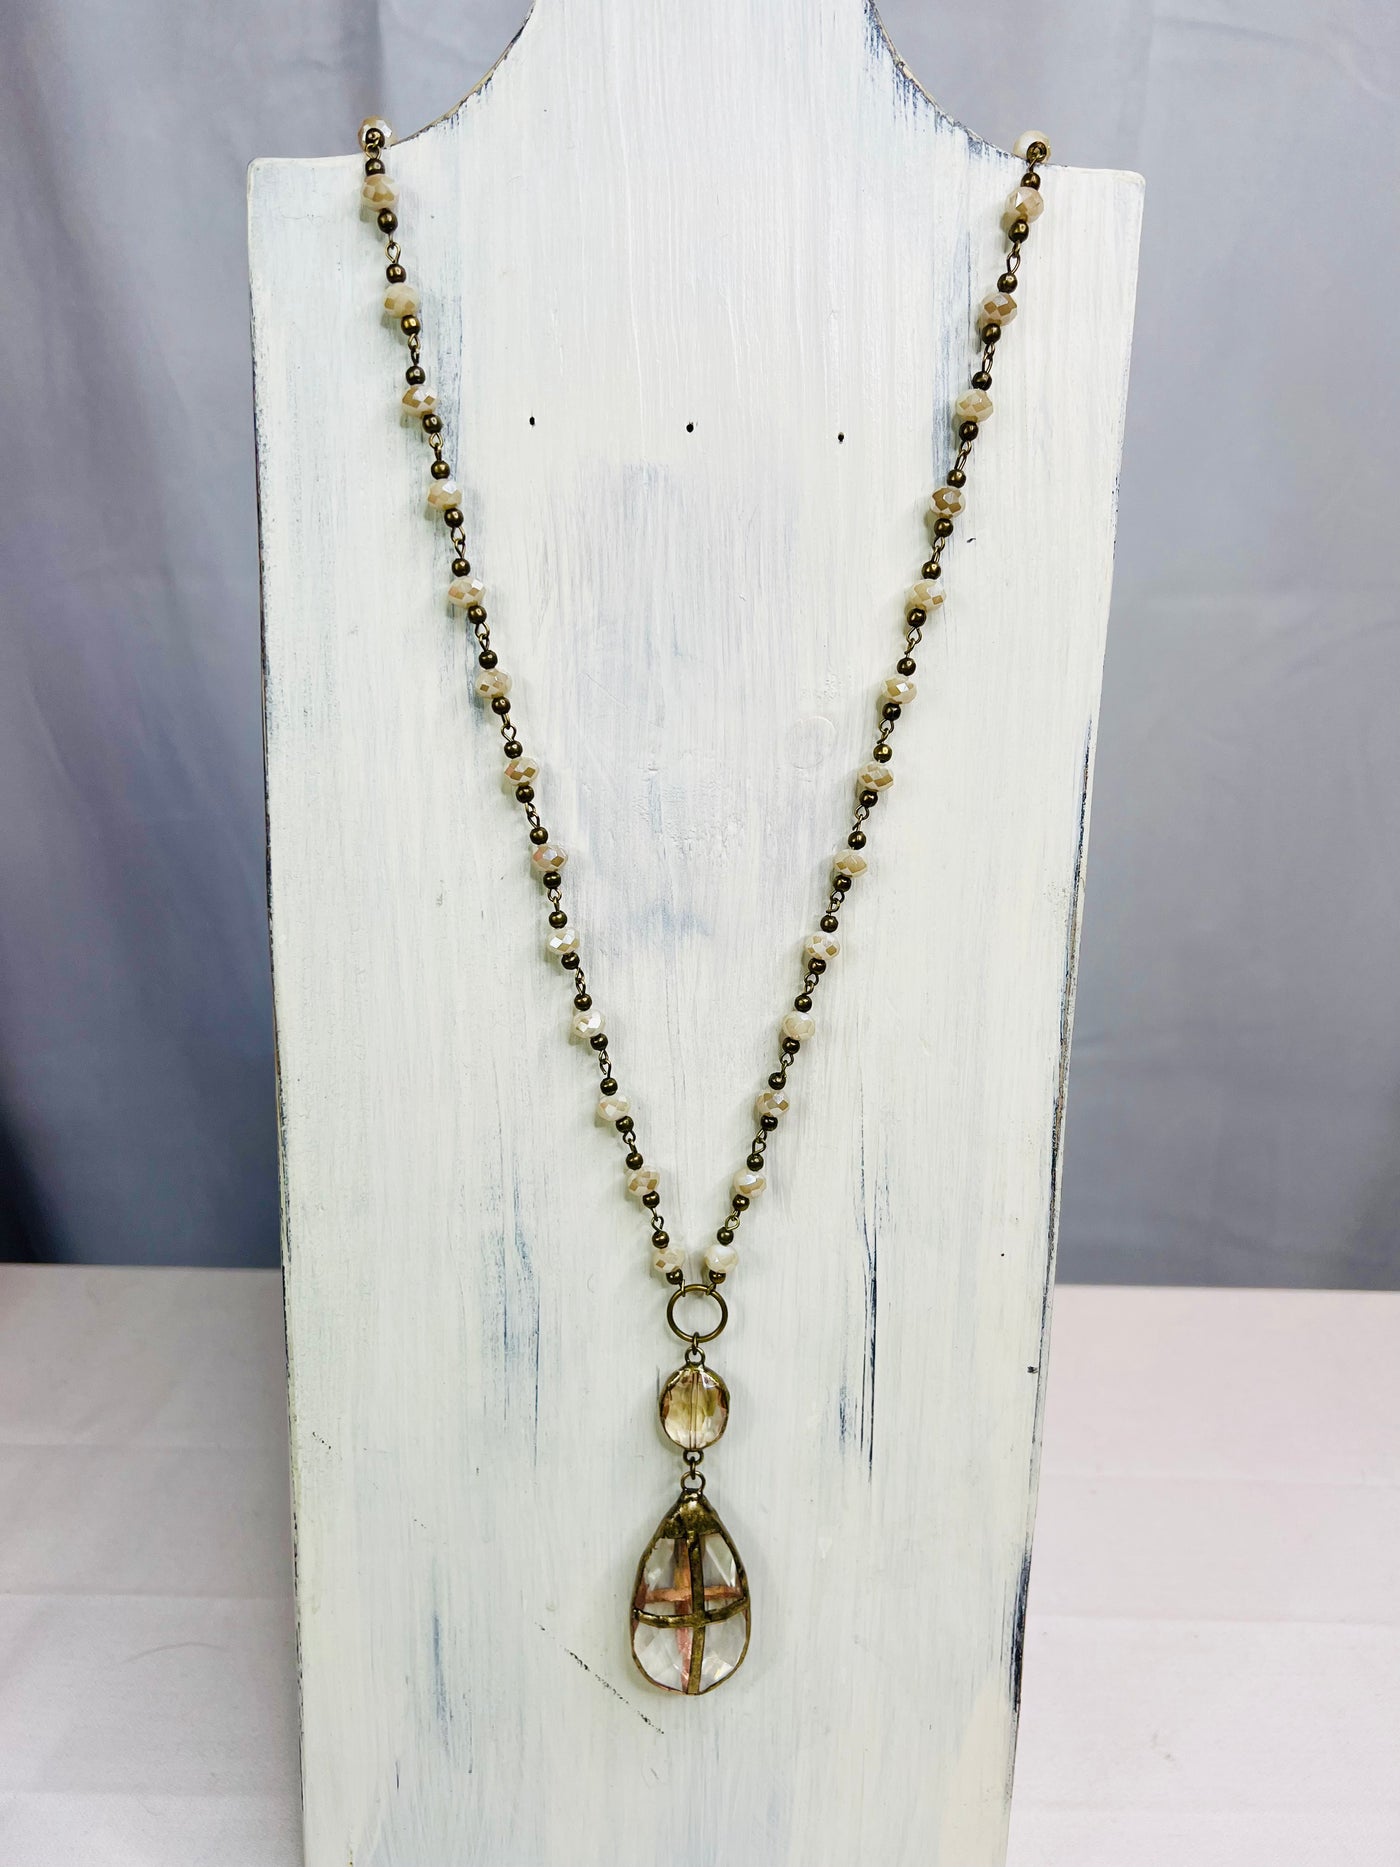 Antique Gold and Pearl Necklace with Crystal Pendant